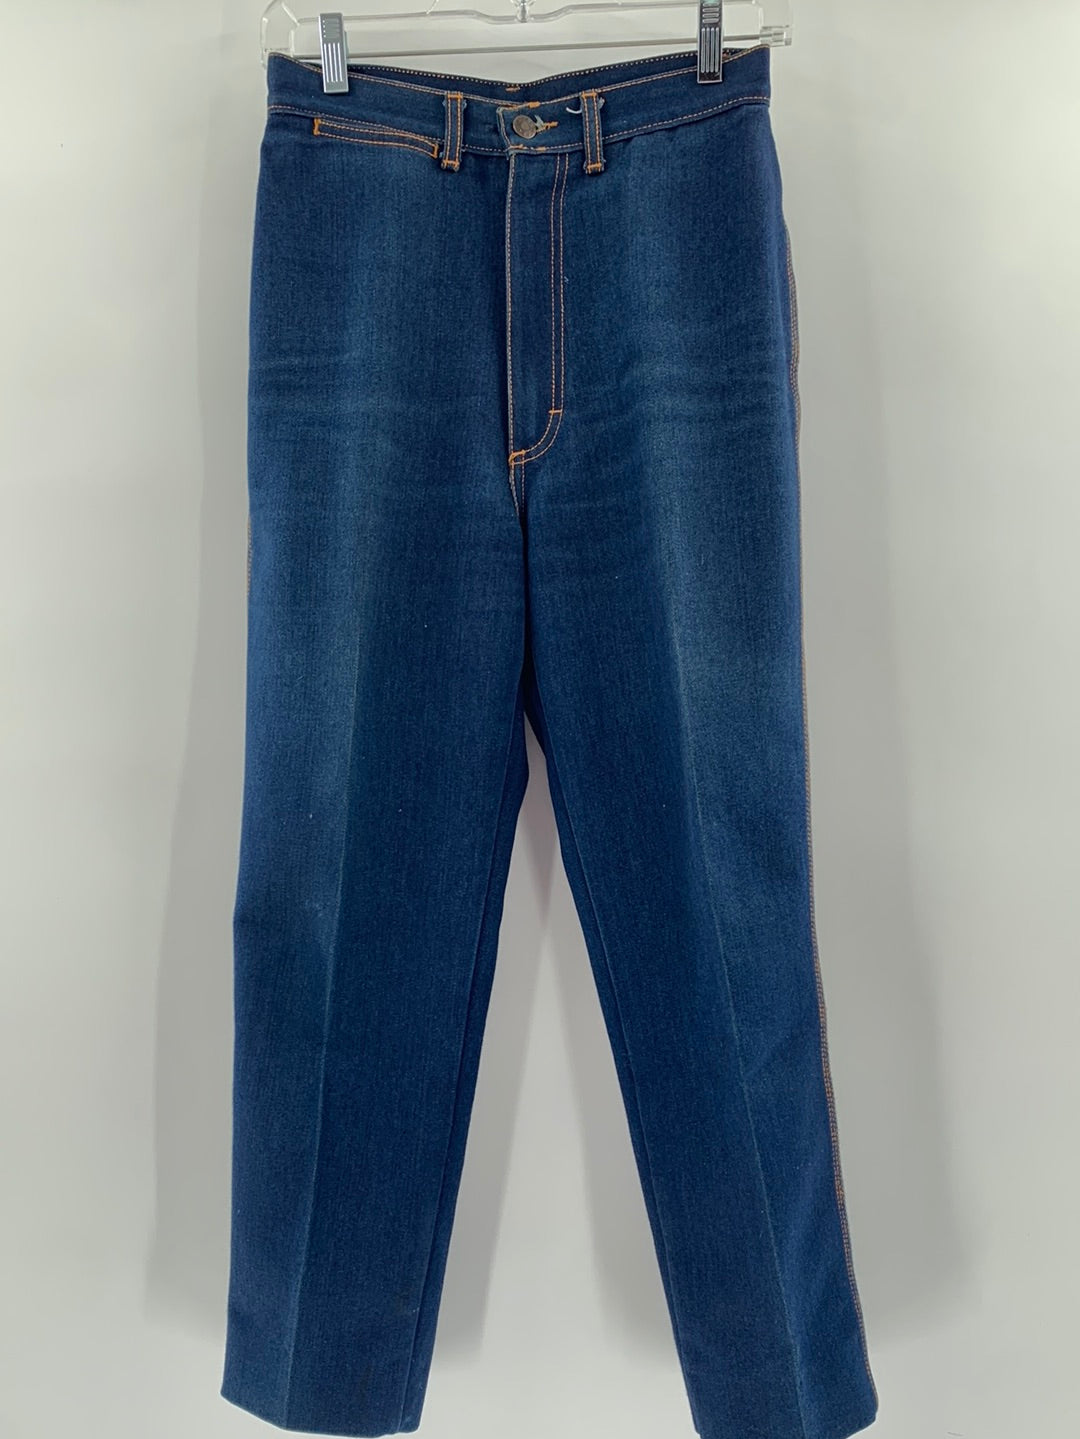 P S. Gitano 80's Blue Jeans (Size 10) – The Thrifty Hippy